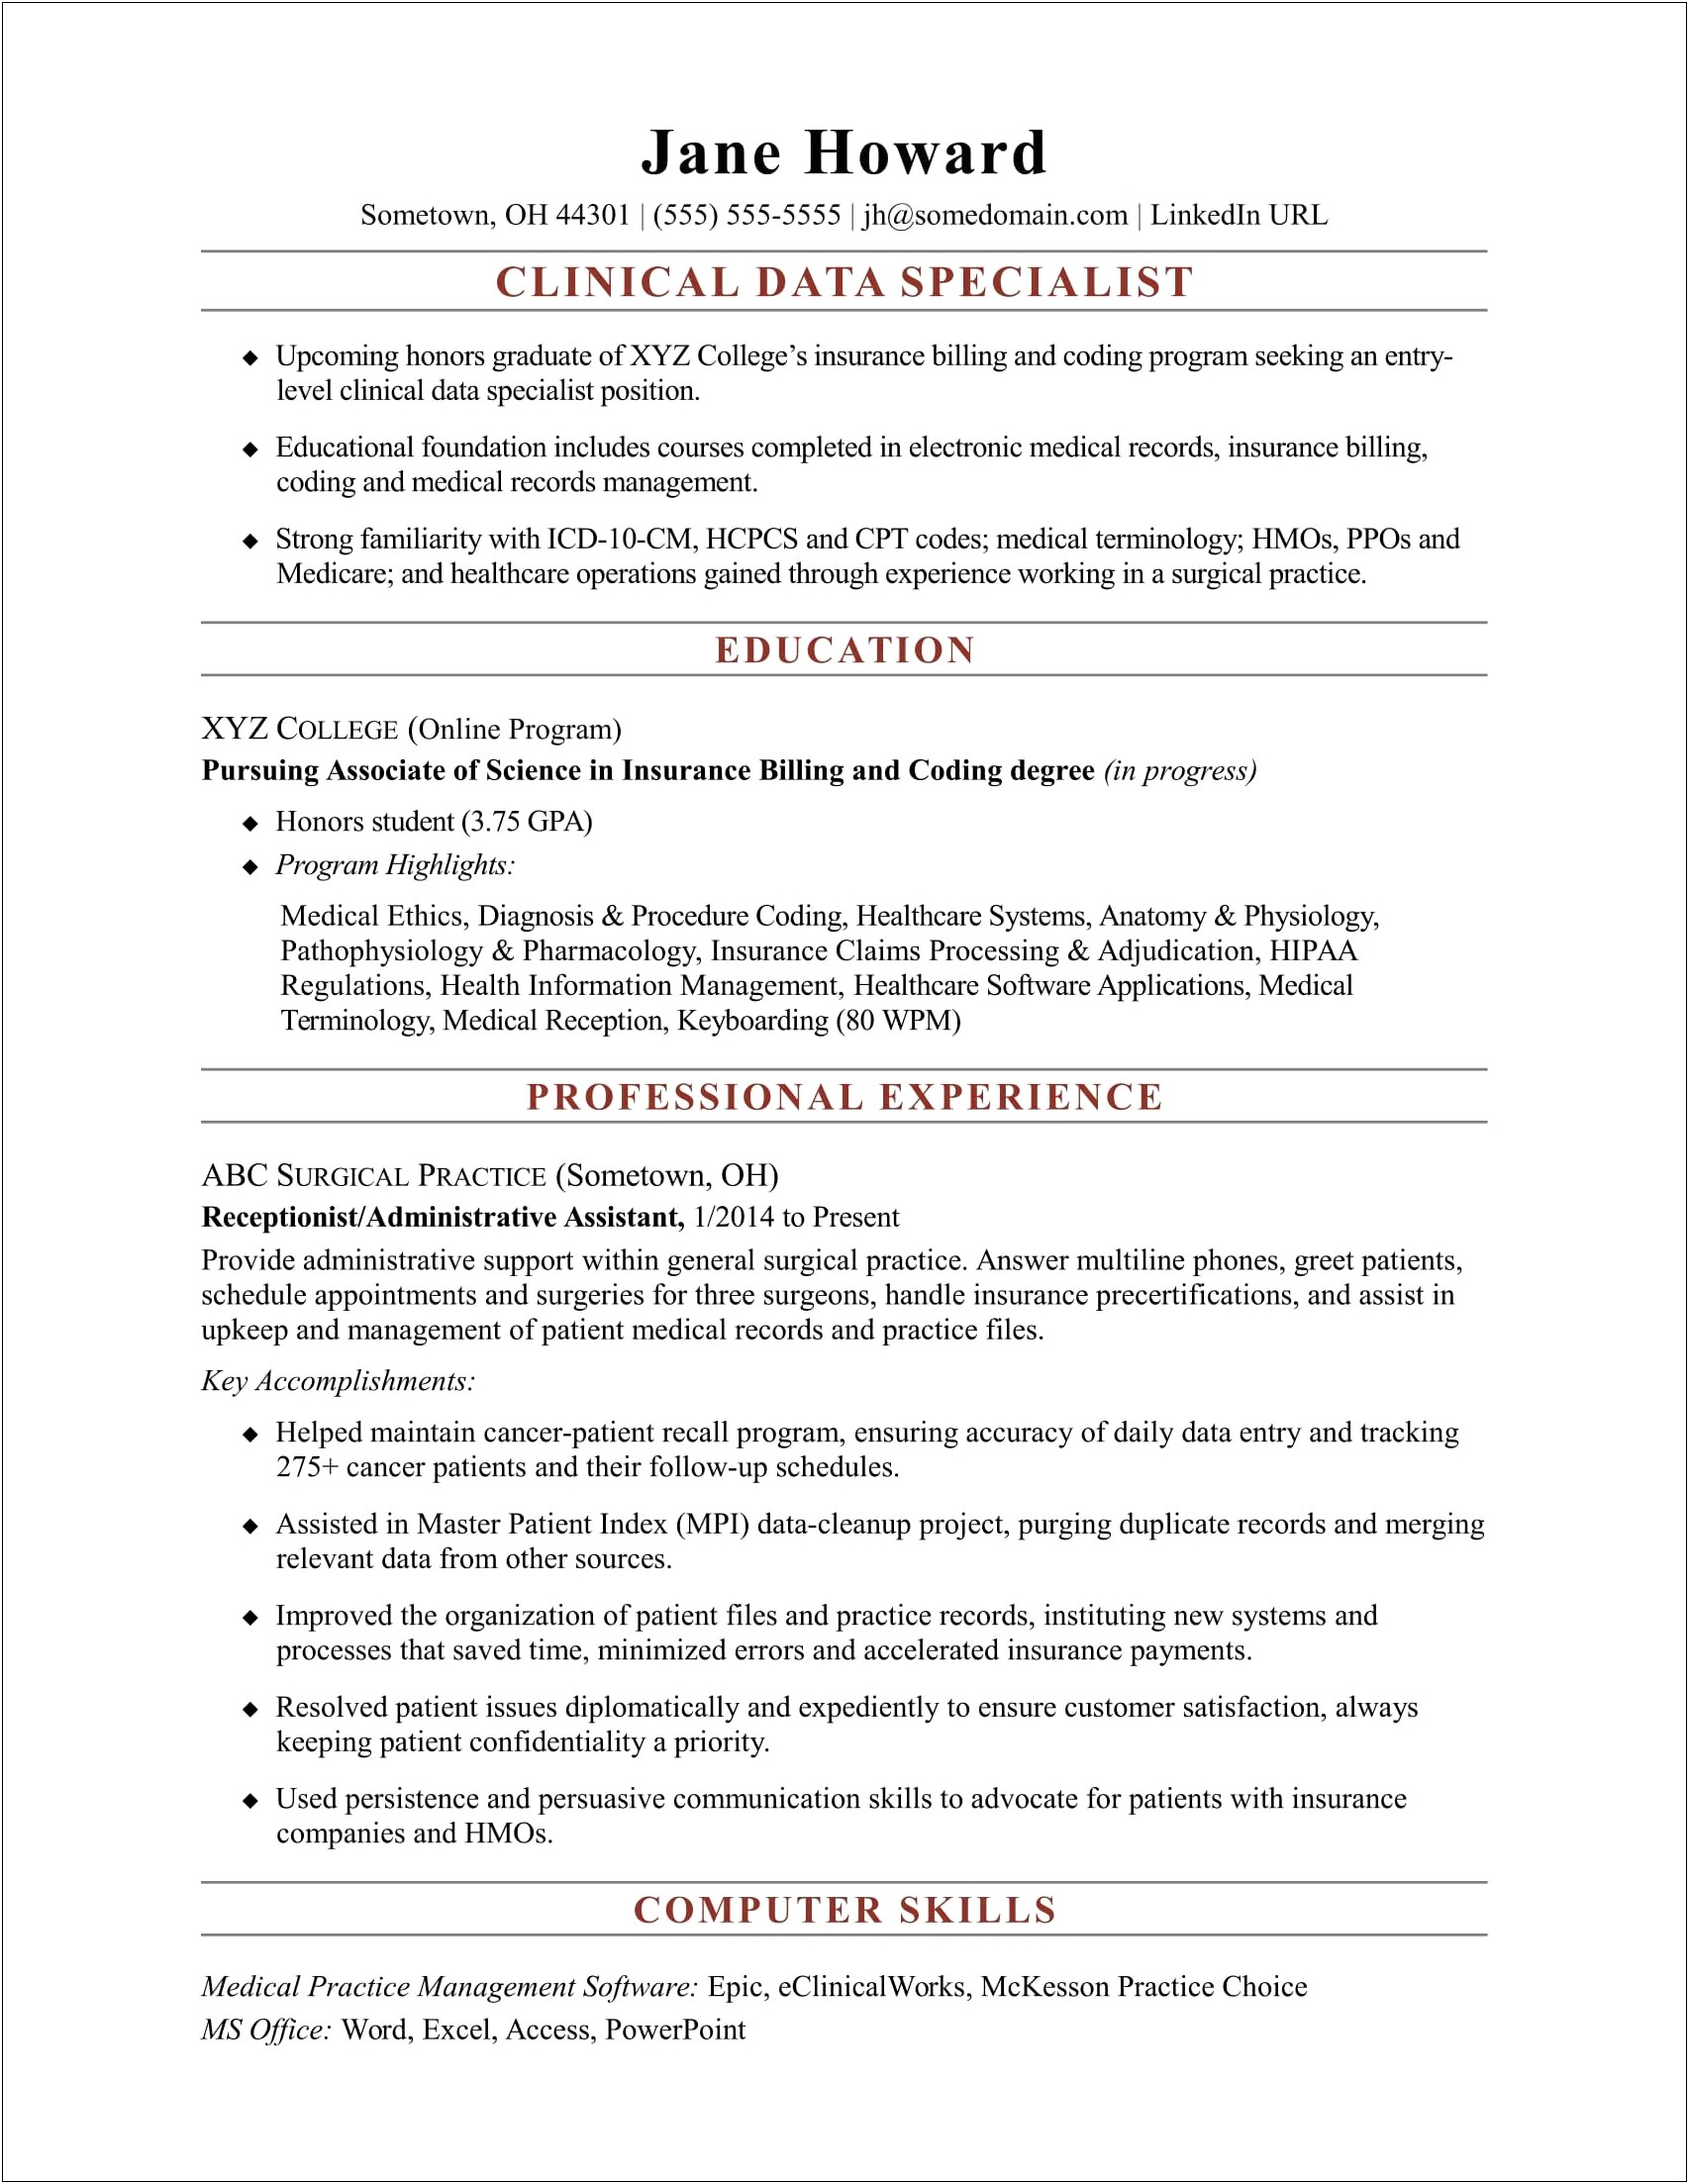 Sample Resume With Education Background